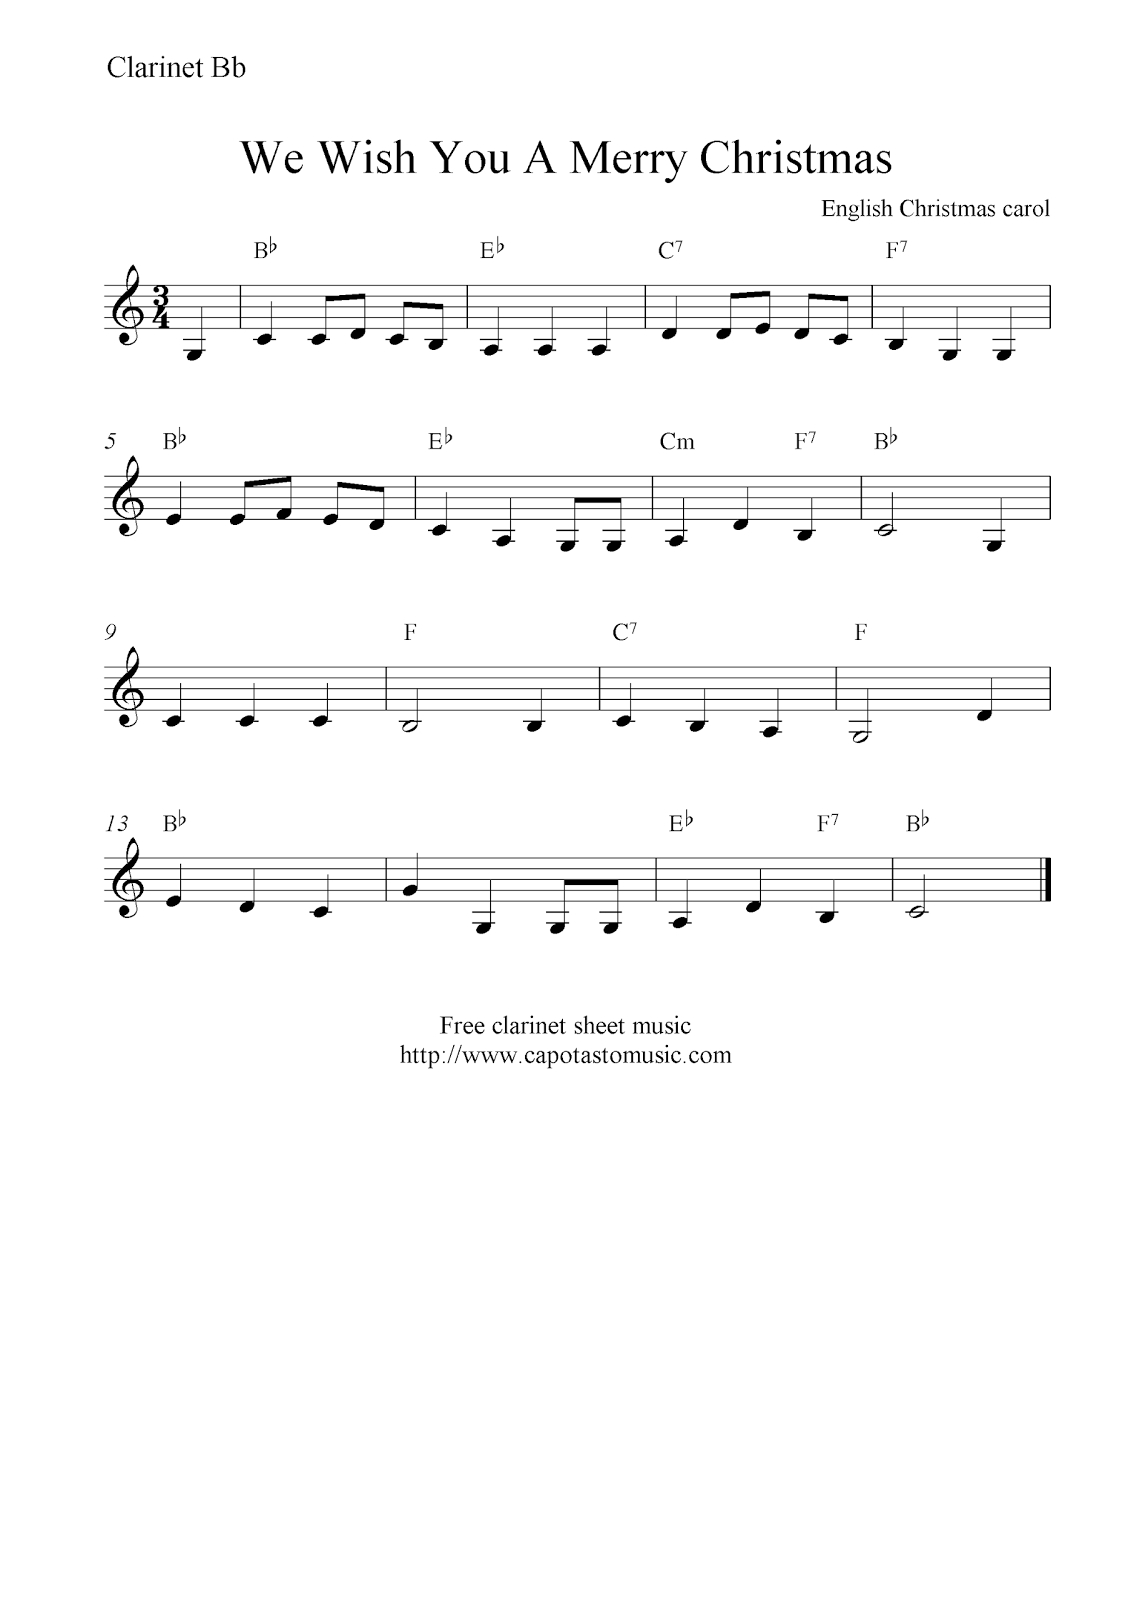 We Wish You A Merry Christmas, Free Christmas Clarinet Sheet Music Notes - Free Printable Christmas Sheet Music For Clarinet